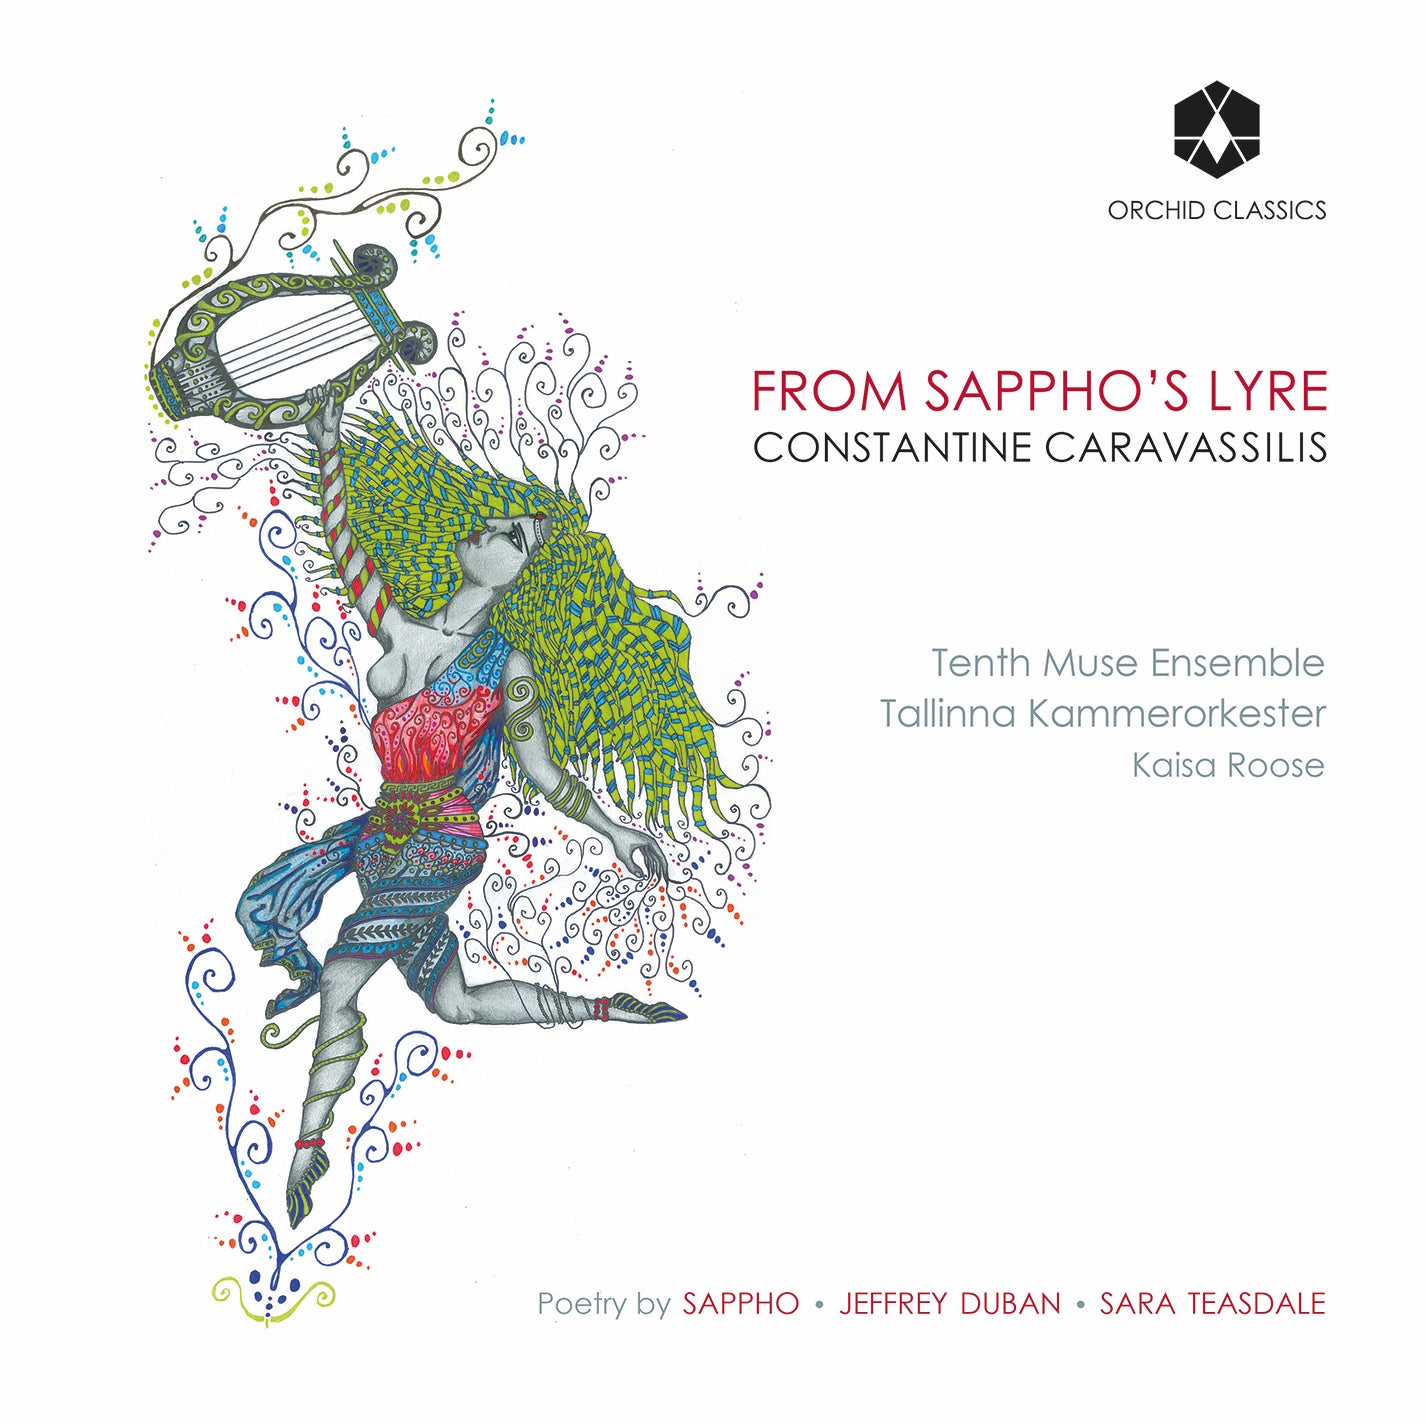 Caravassilis: From Sappho's Lyre / Tenth Muse Ensemble, Tallinn Chamber Orchestra